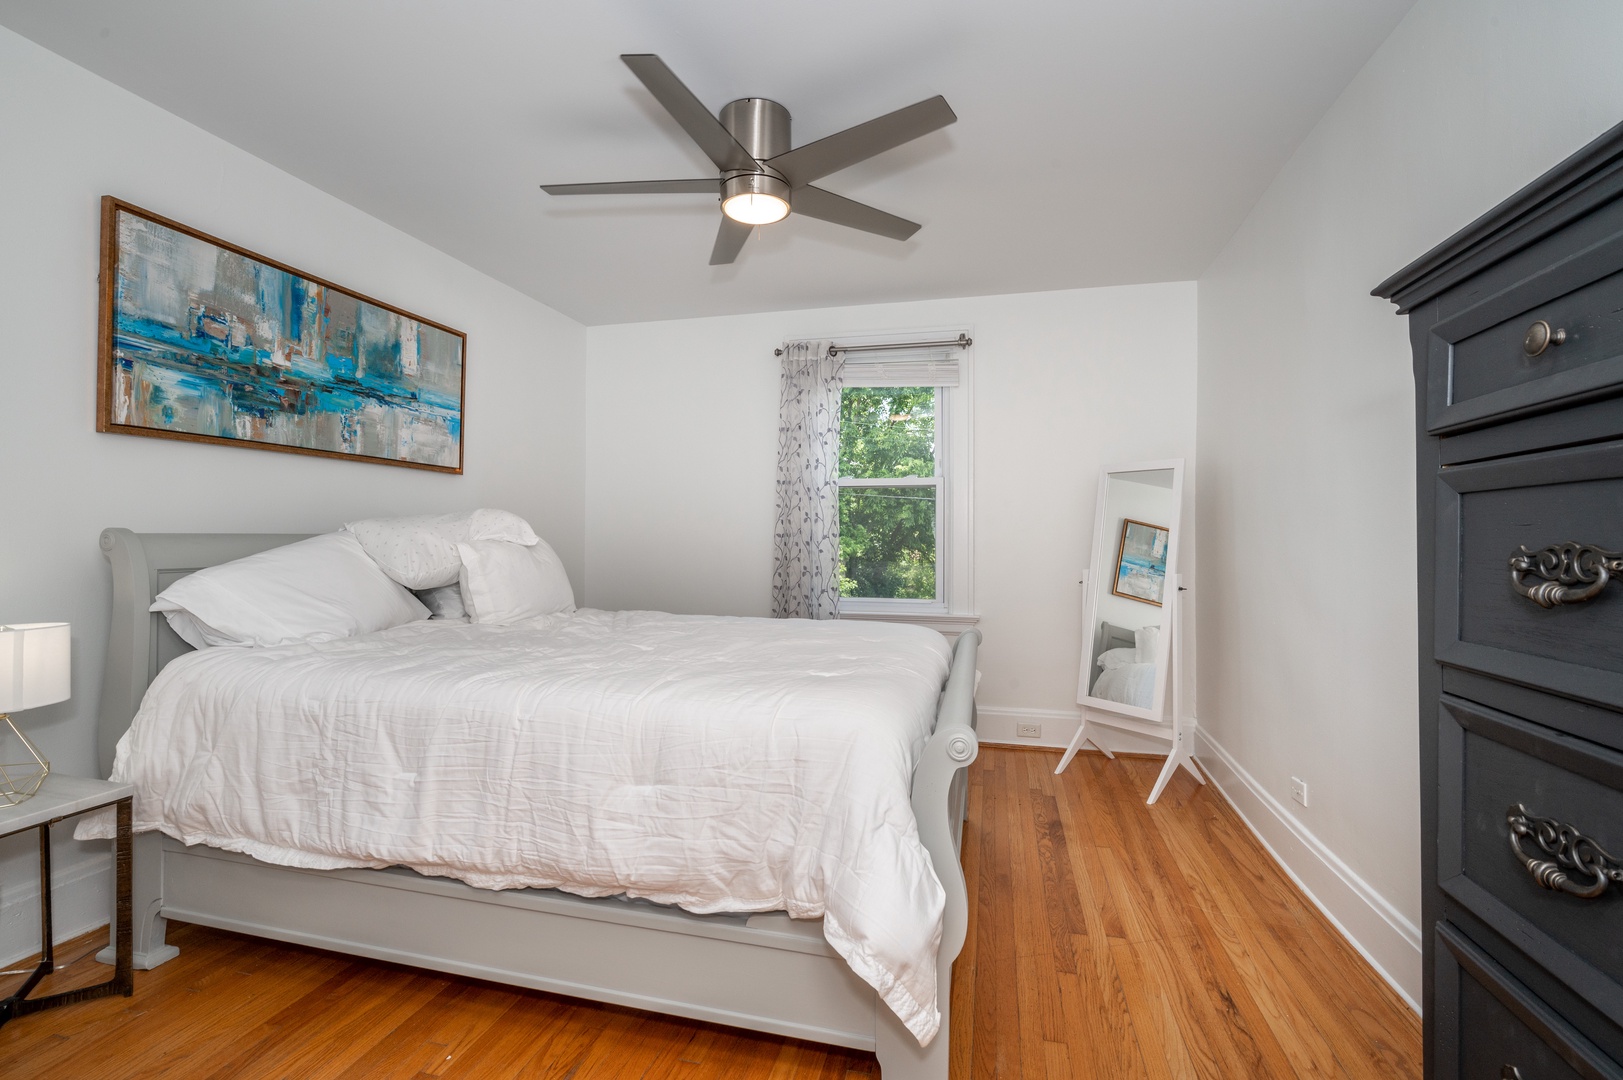 Unit 2 - The 1st of 3 bedrooms, offering a regal queen bed & ceiling fan